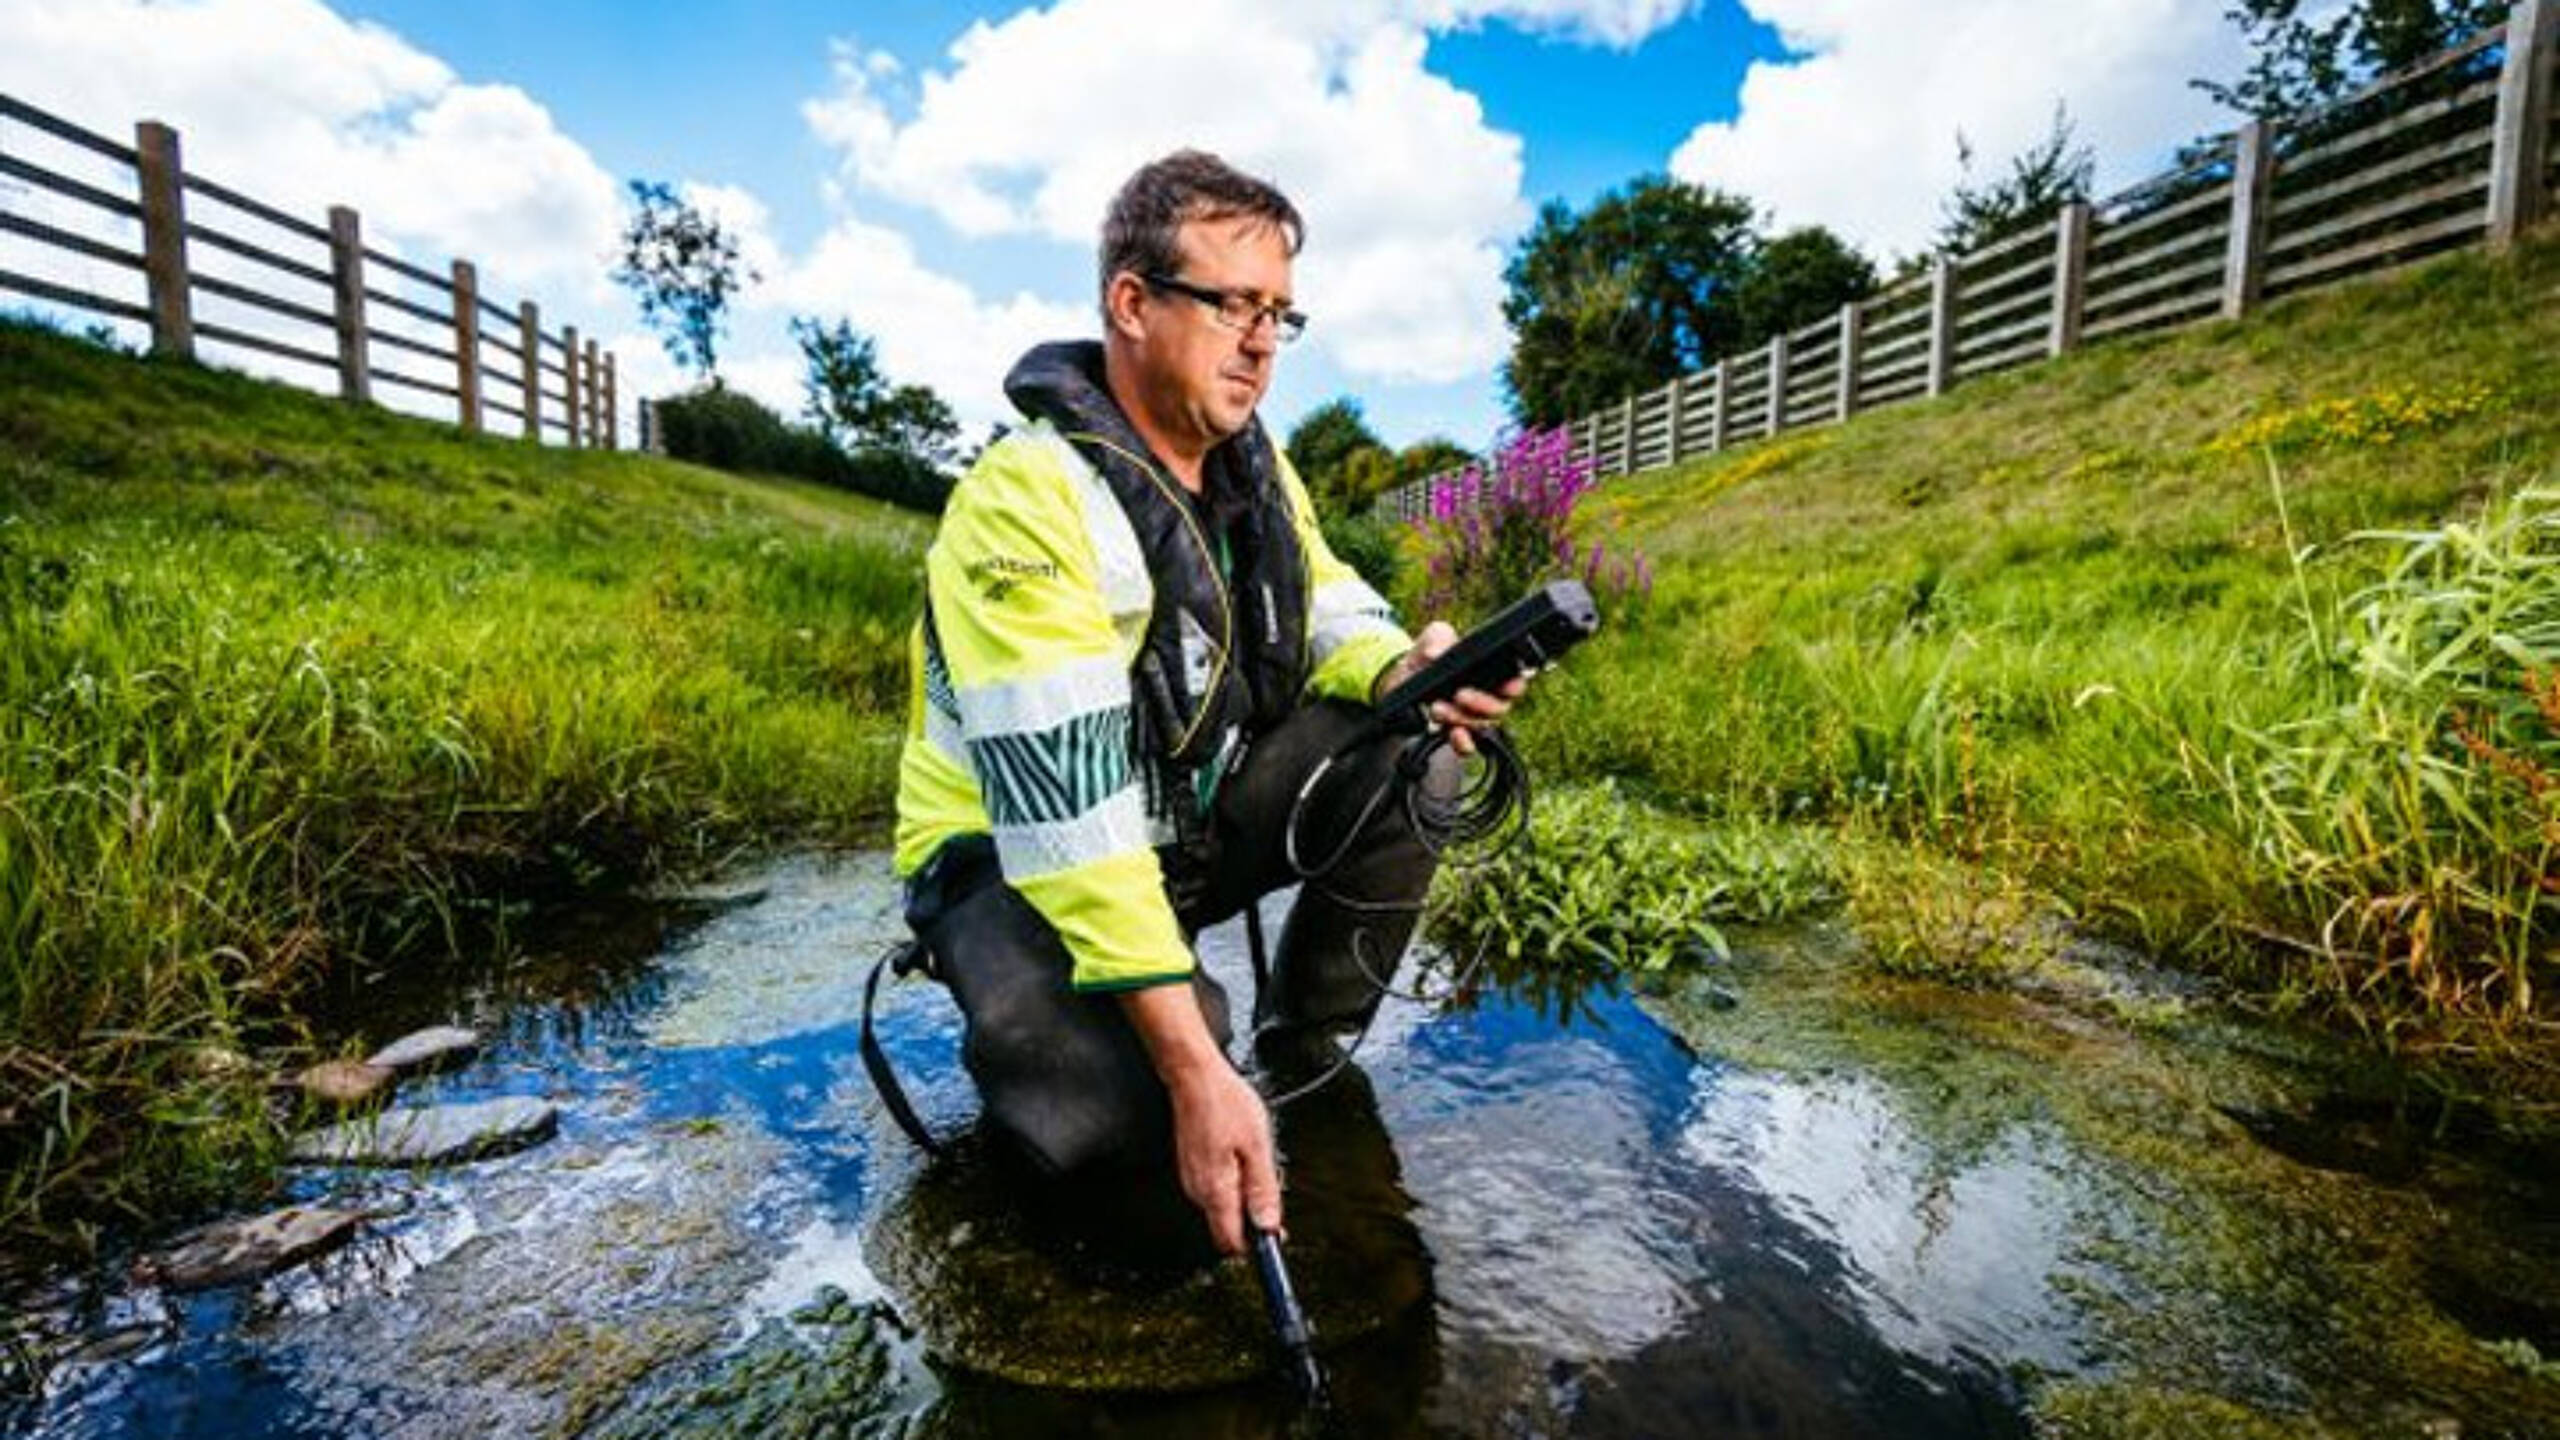 Environment Agency staff follow those at Defra in backing strike action